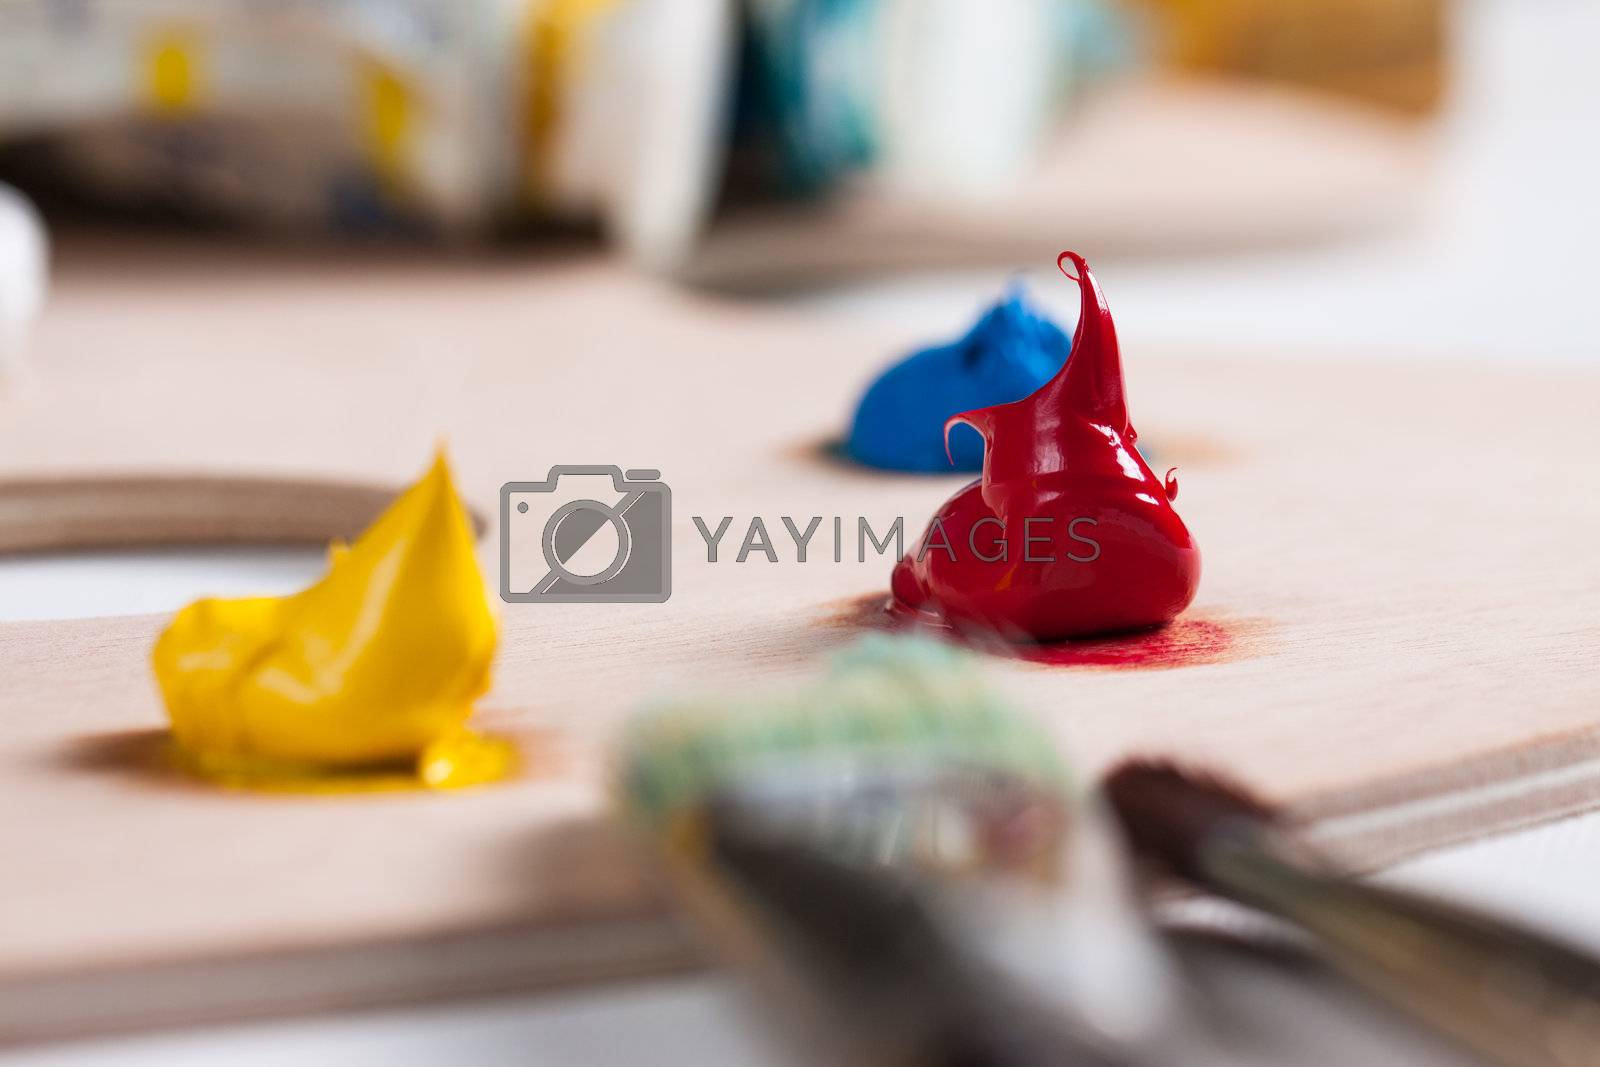 Royalty free image of Paint and paint brushes by Jaykayl